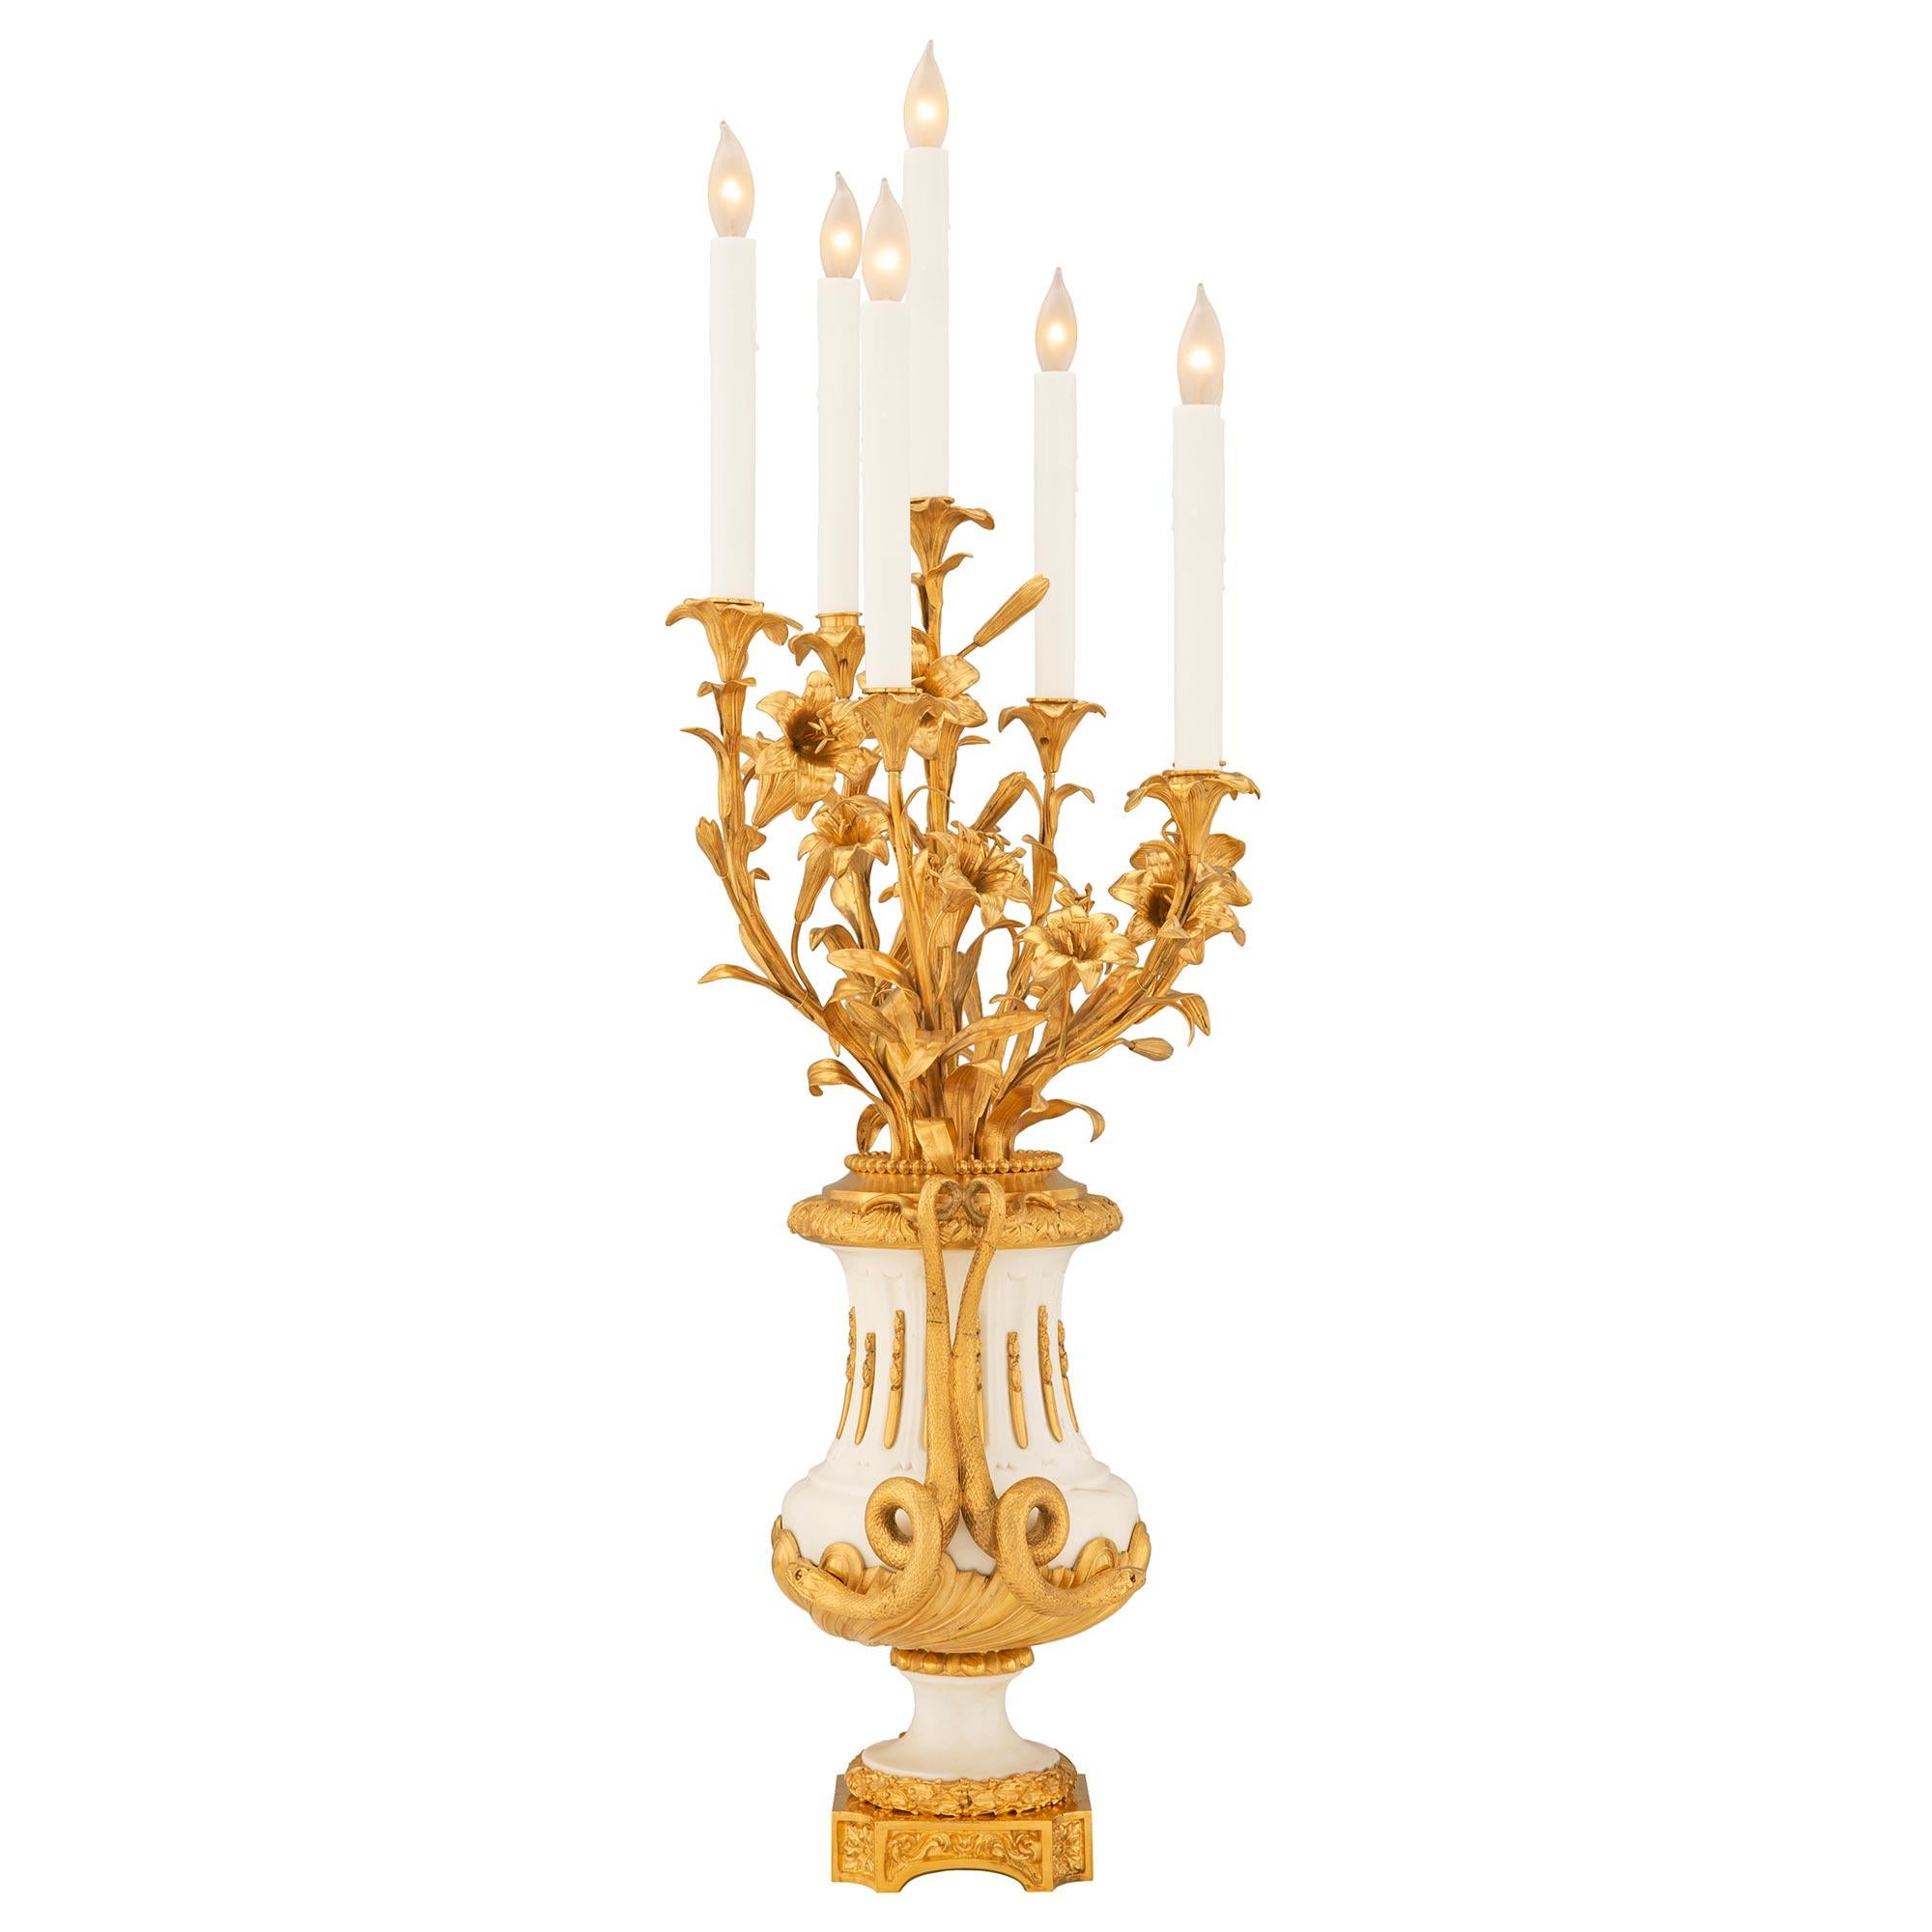 True Pair of French 19th Century Louis XVI St. Marble & Ormolu Candelabra Lamps In Good Condition For Sale In West Palm Beach, FL